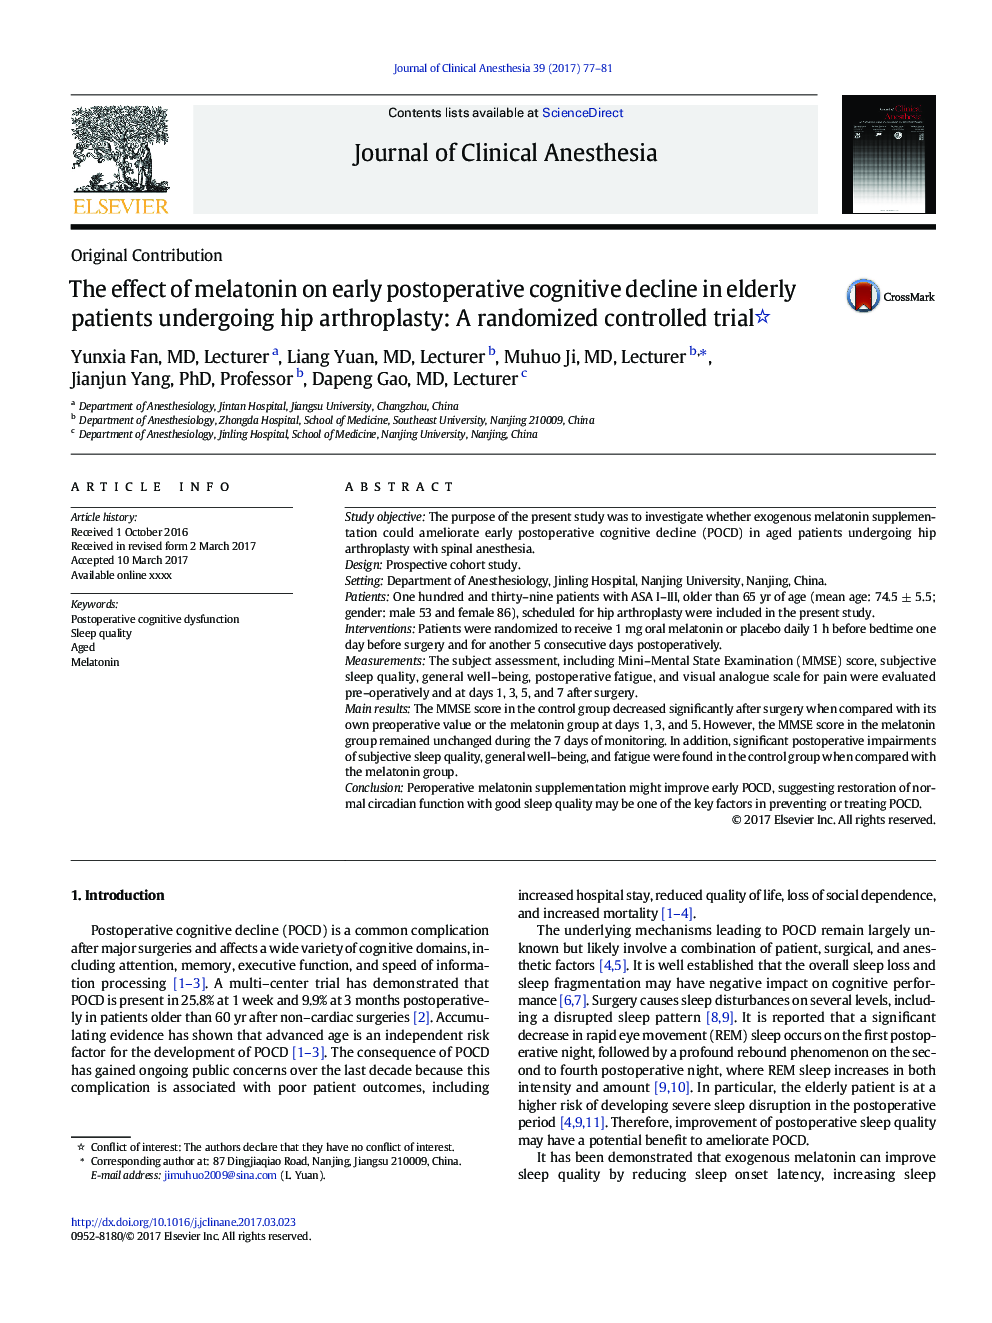 The effect of melatonin on early postoperative cognitive decline in elderly patients undergoing hip arthroplasty: A randomized controlled trial